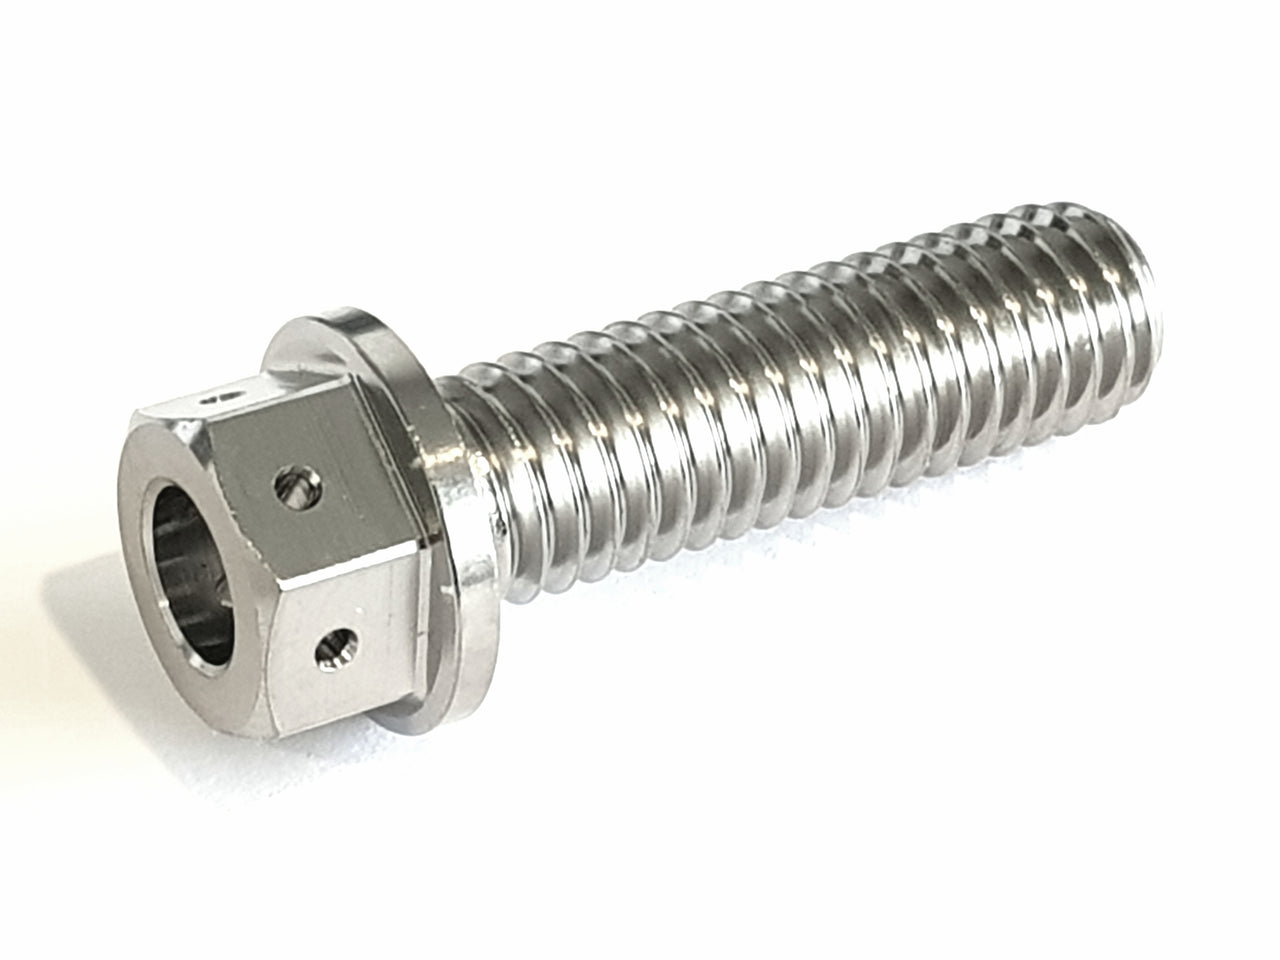 7/16 UNC 1.500" long reduced hex bolt with holes drilled